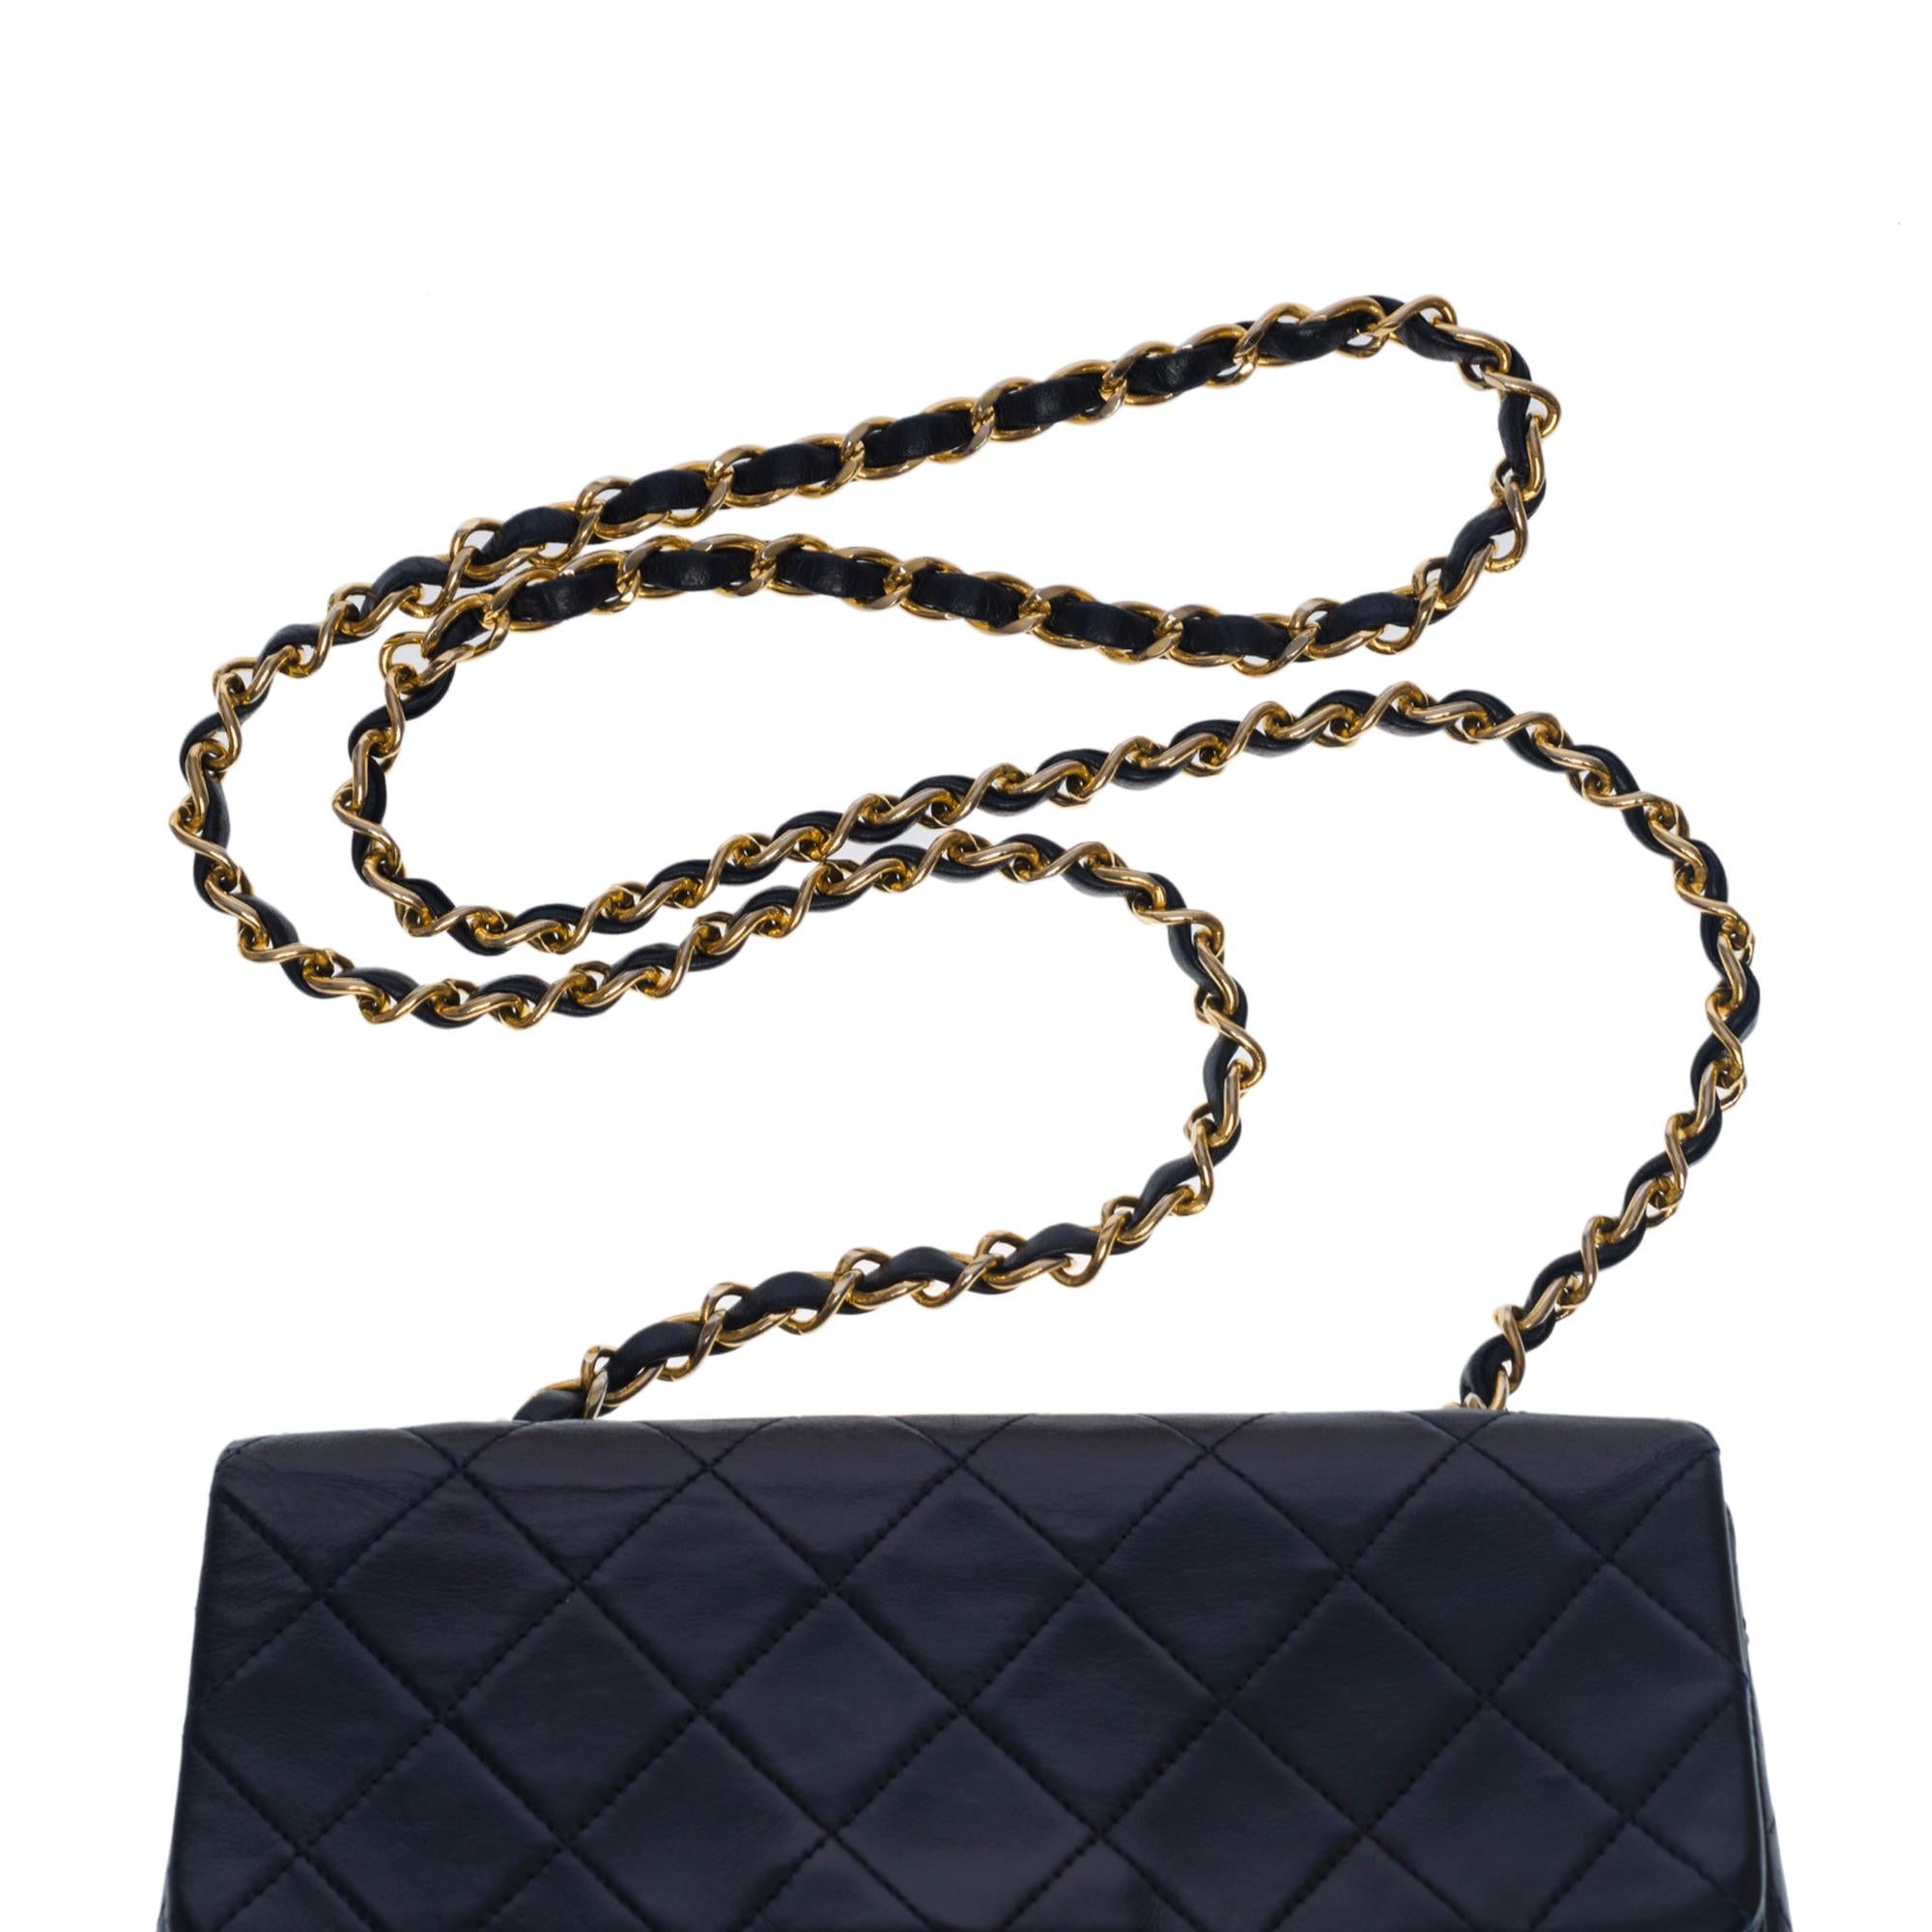 Chanel Mini Timeless flap shoulder bag in navy blue quilted lambskin, GHW For Sale 1